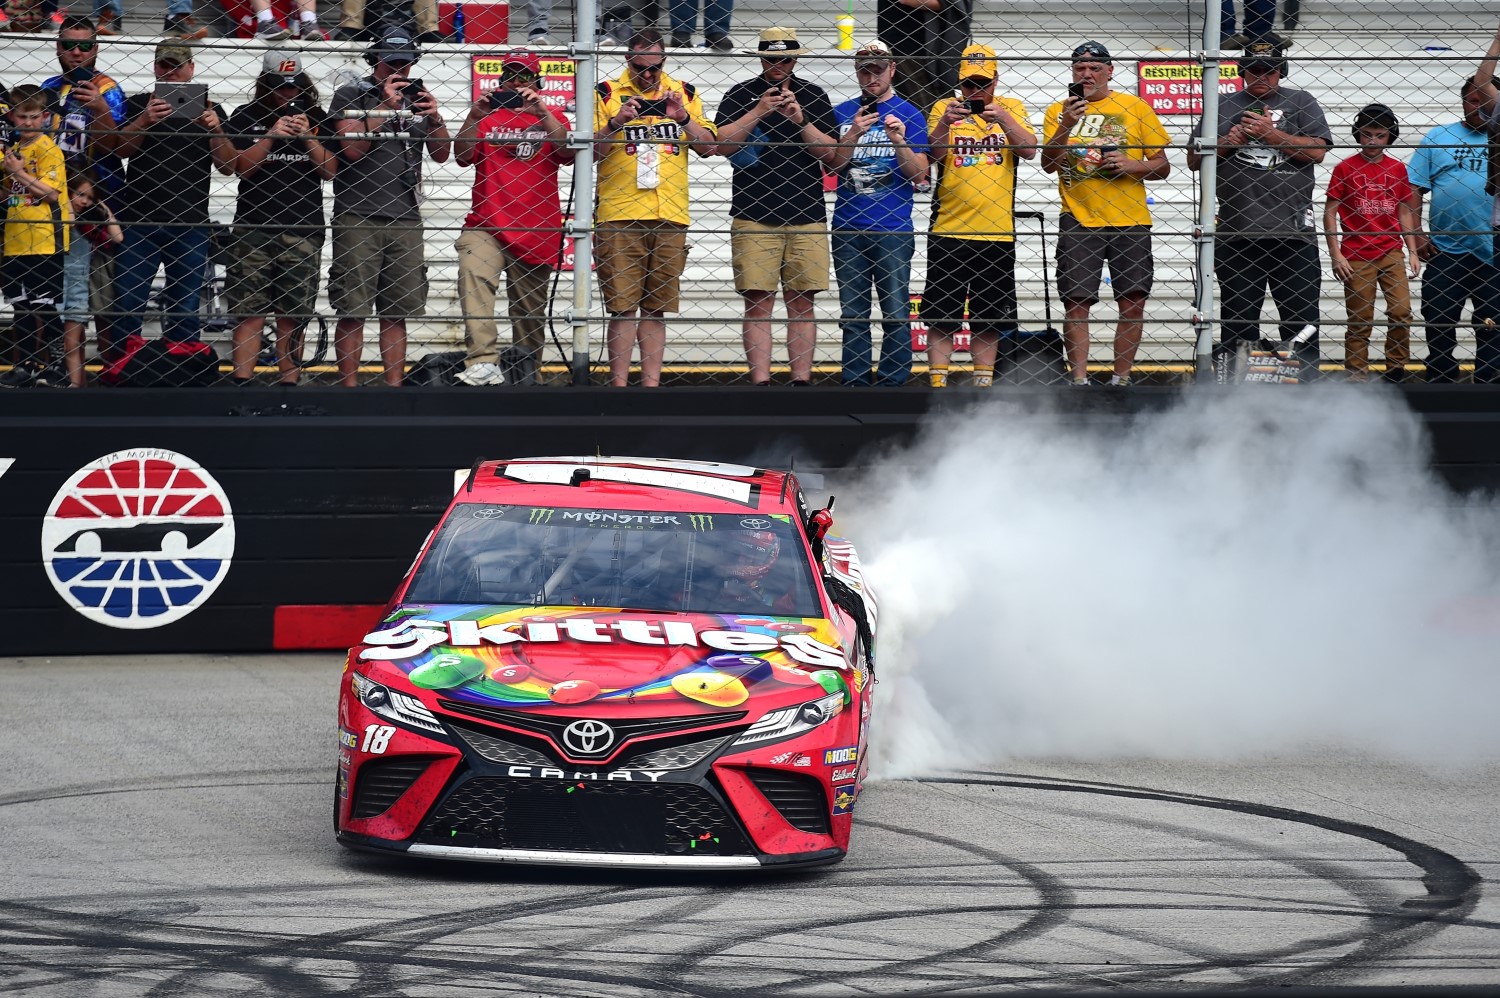 Busch does some donuts